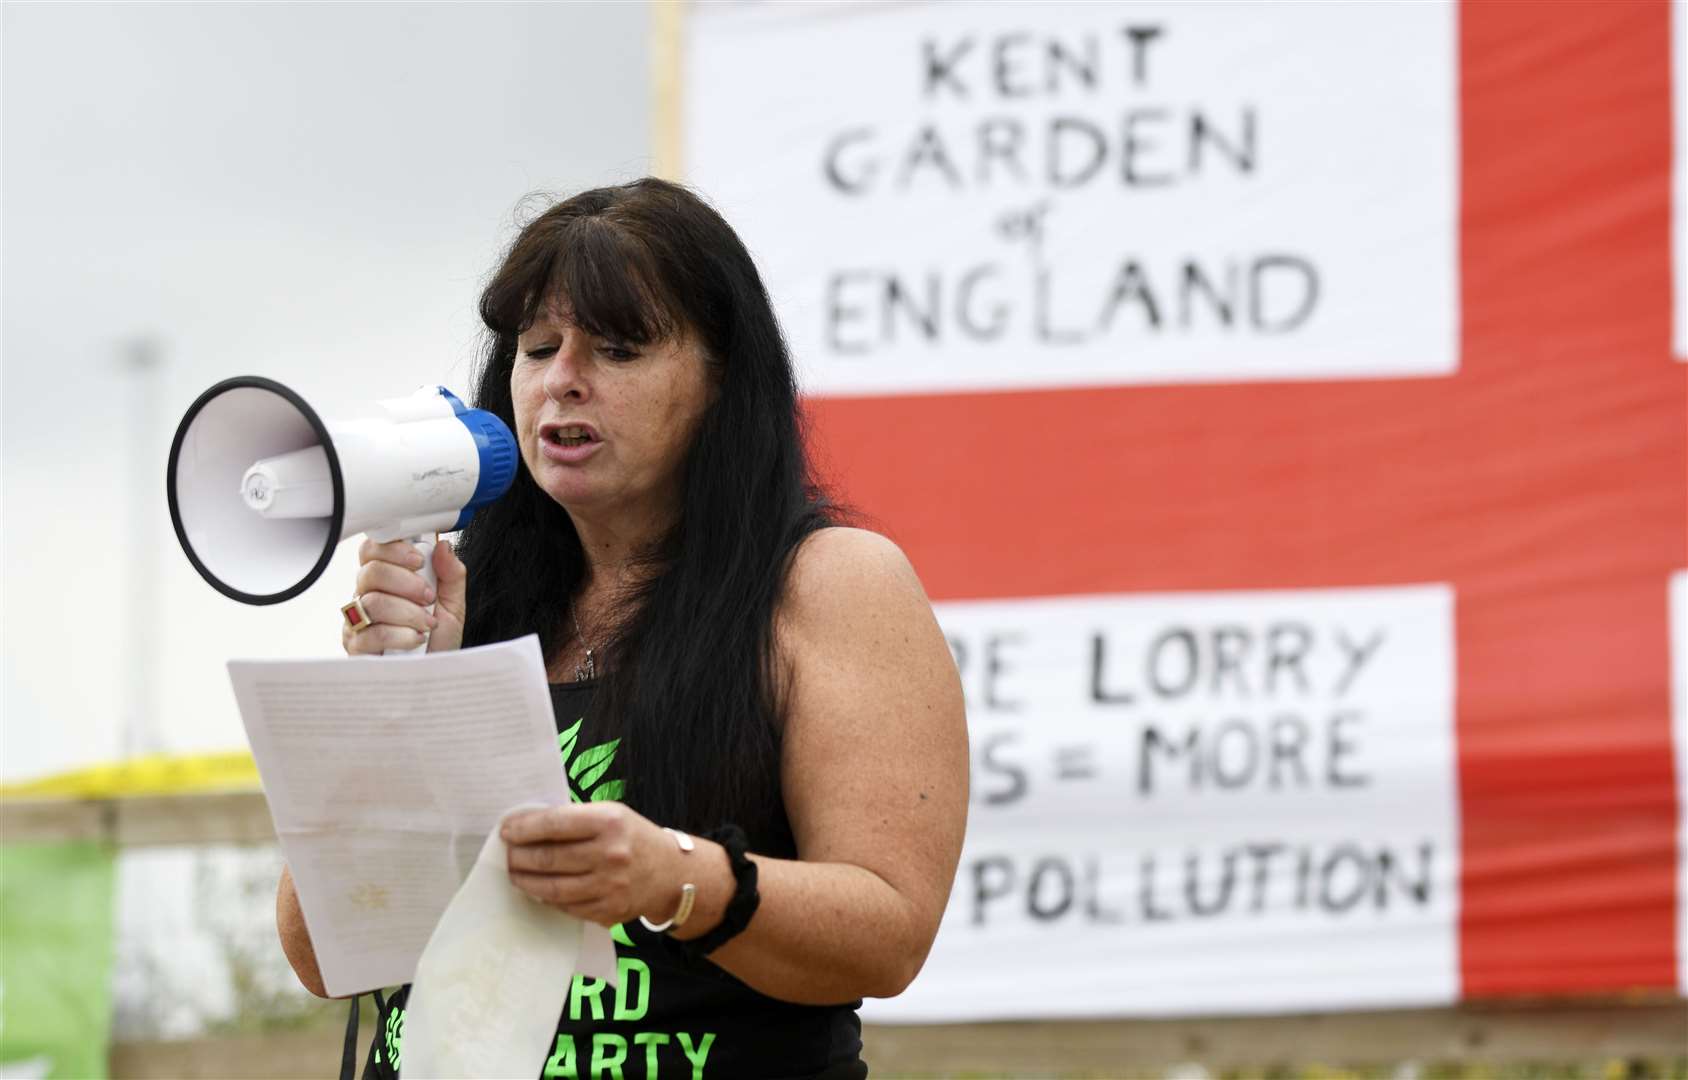 Ashford Green Party's Mandy Rossi says she is "glad the drivers were shown compassion by Ashford". Picture: Barry Goodwin